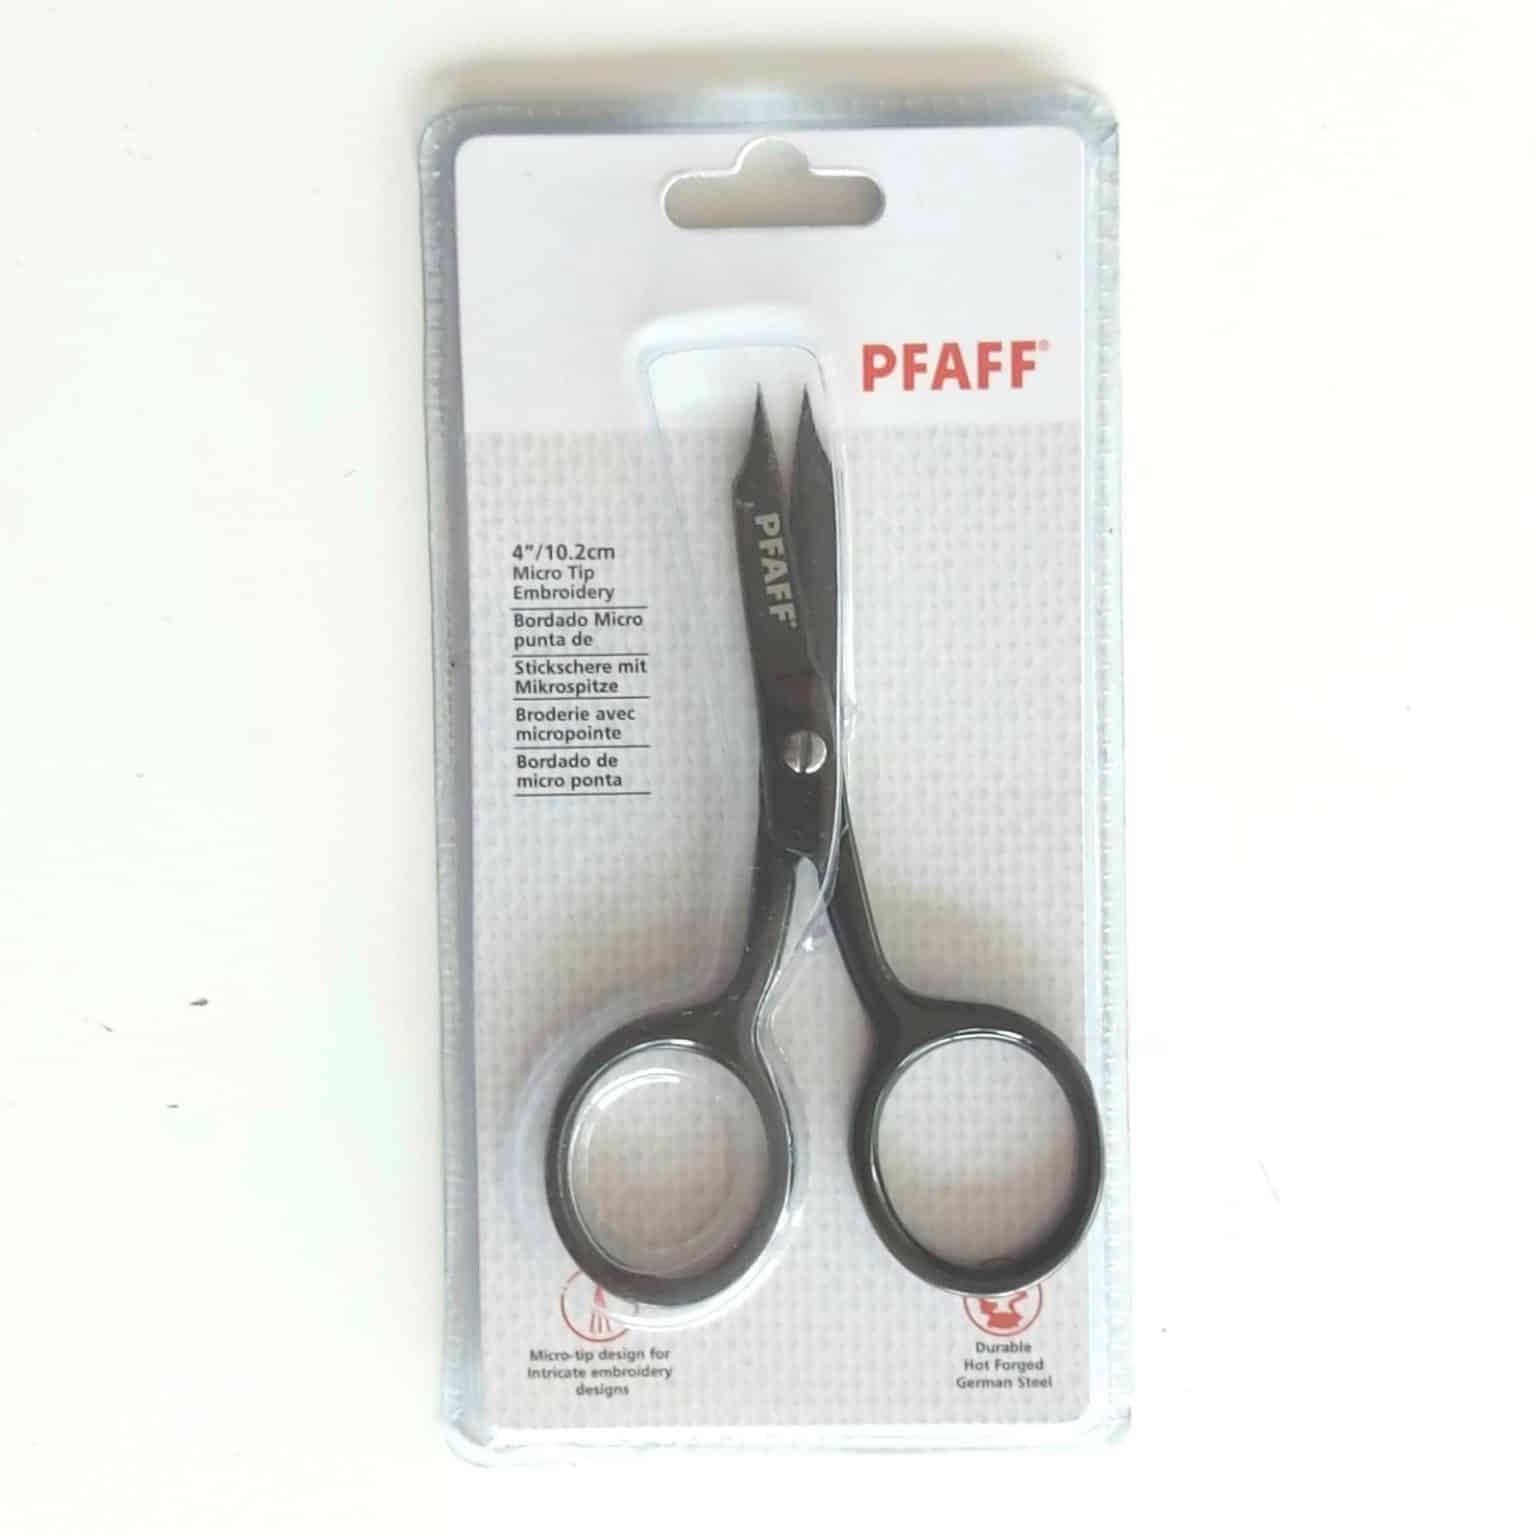 Pfaff Embroidery Scissors | More Sewing